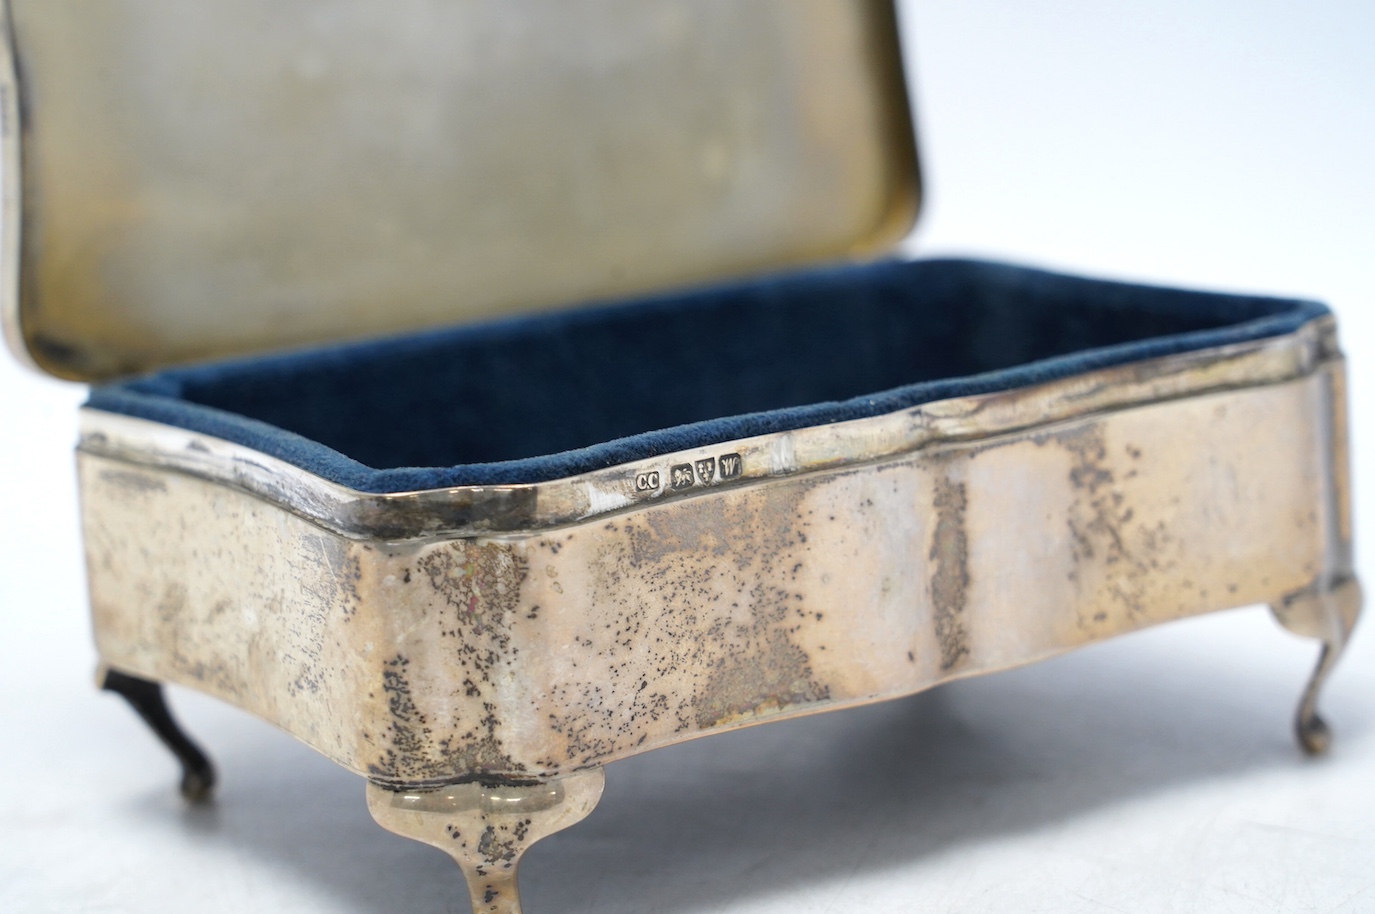 A George V silver mounted rectangular trinket box, by Colen Hewer Cheshire, Chester, 1922, 14cm. Condition - fair to poor